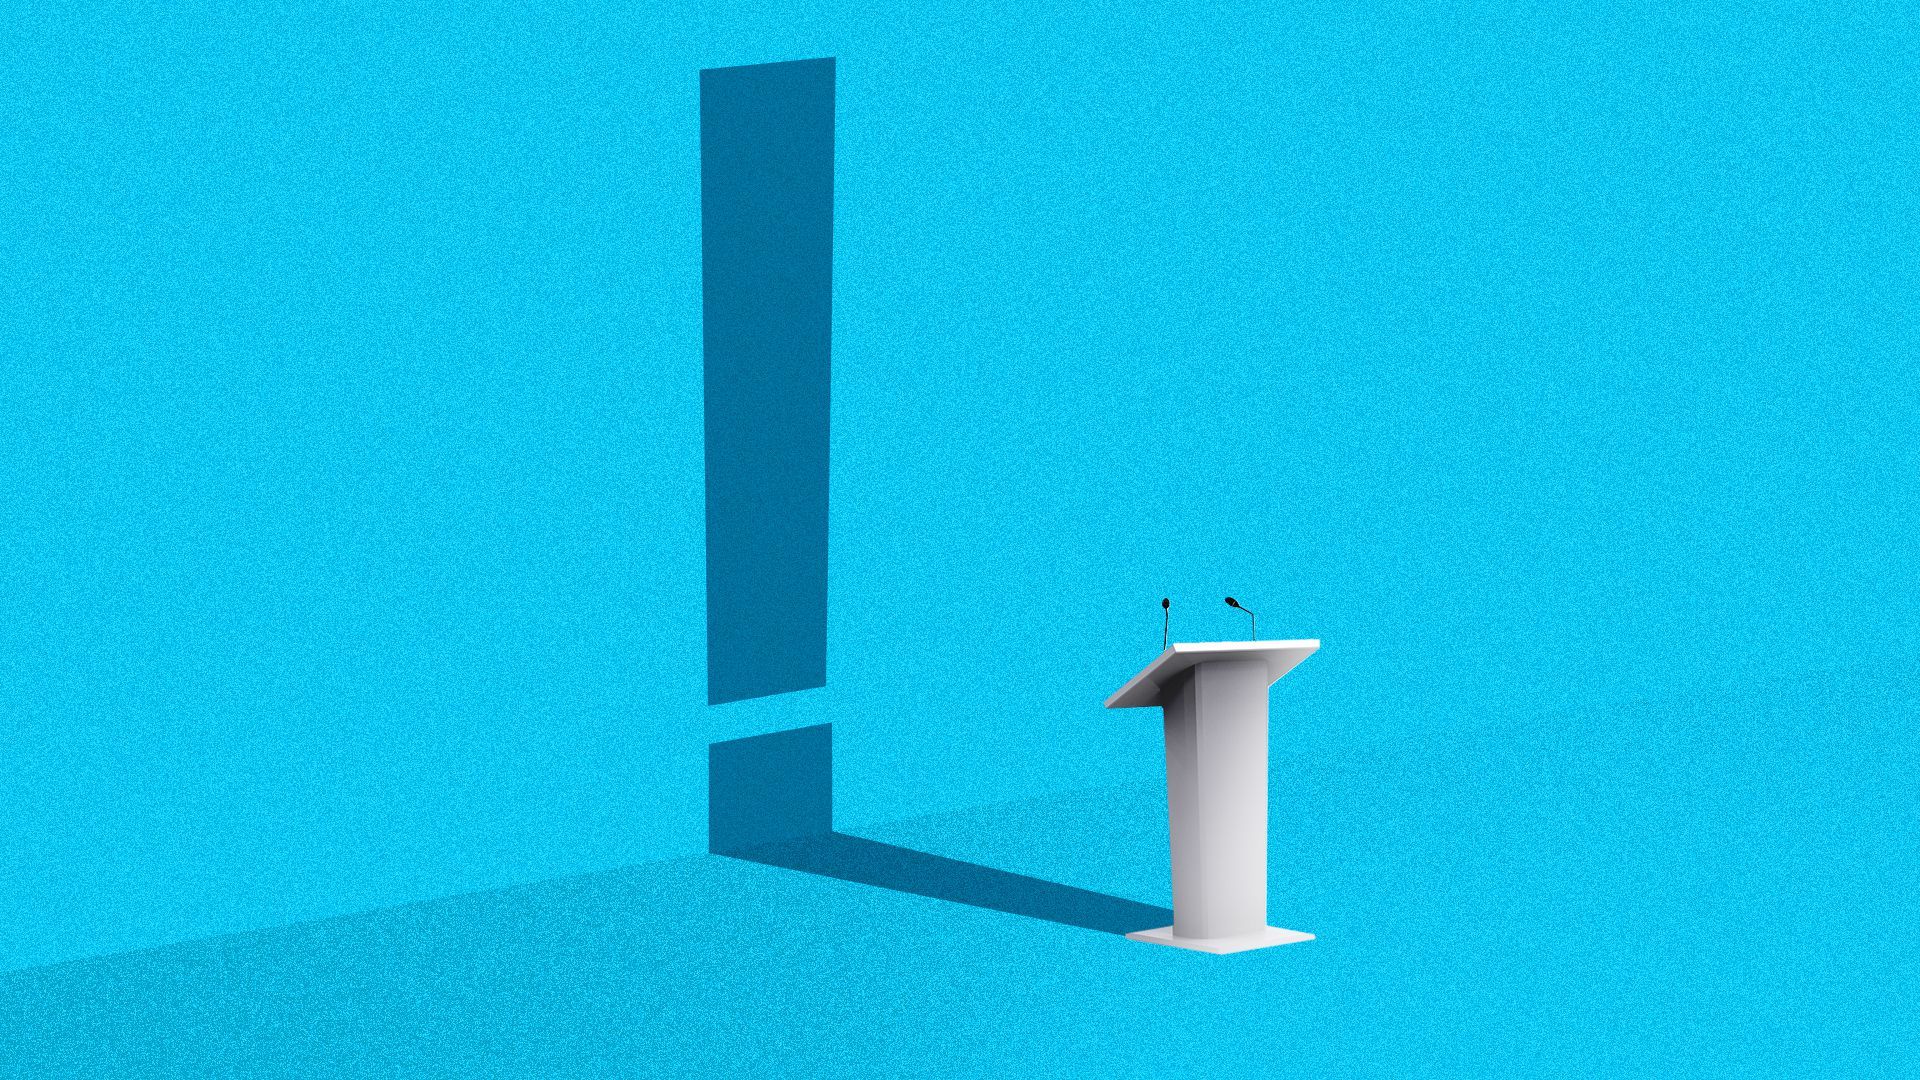 Illustration of a podium casting a shadow in the shape of an exclamation point.